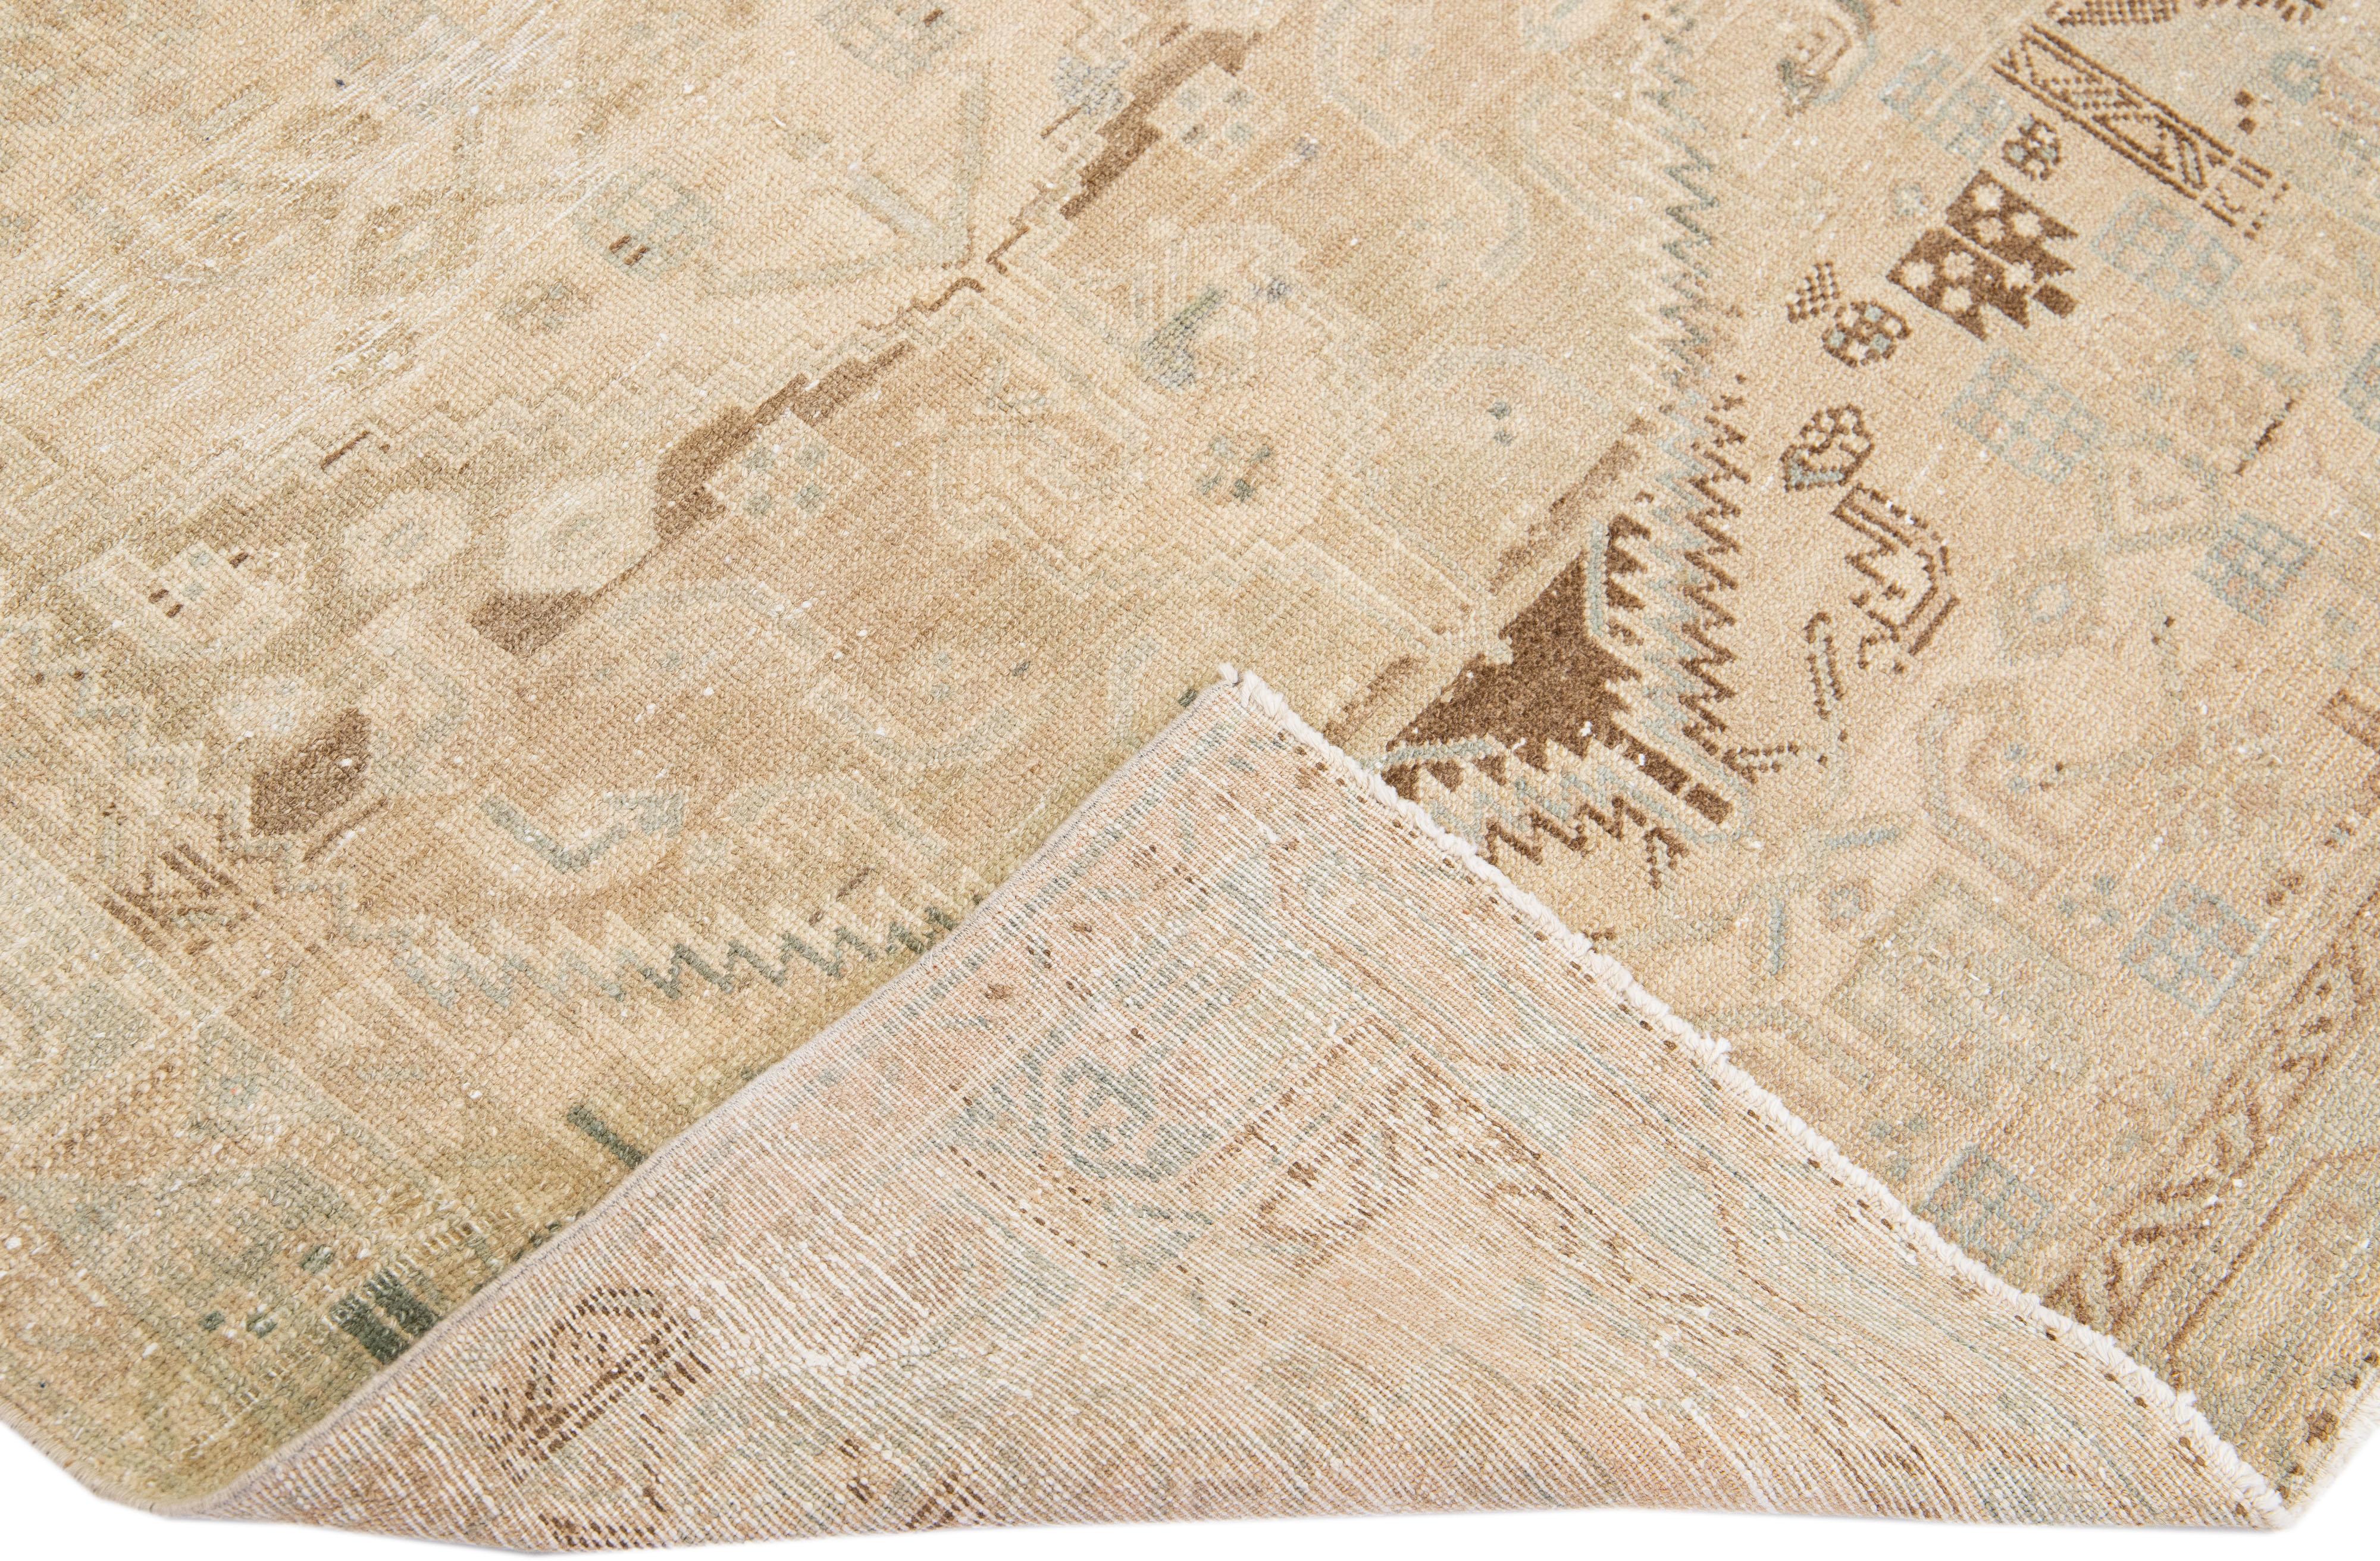 Beautiful antique Hamadan hand-knotted wool rug with a beige field. This Persian piece has brown and blue accents in a gorgeous all-over floral pattern design.

This rug measures: 4'1